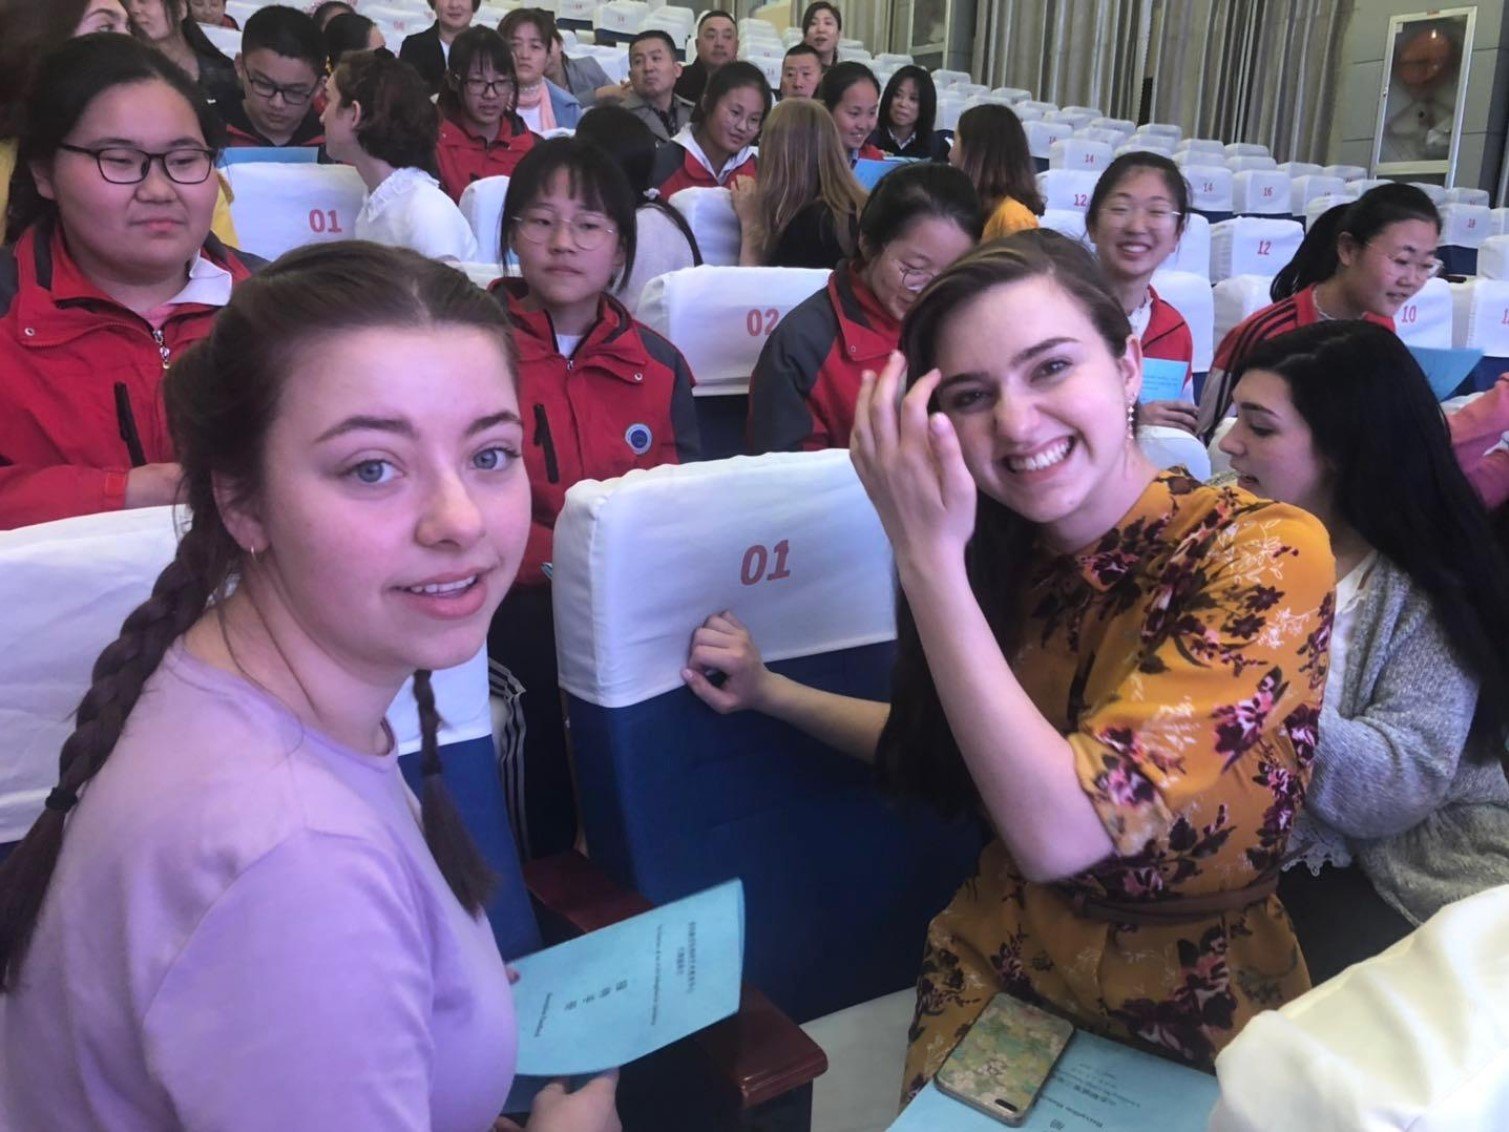 Student Study Tour Group members and Chinese students smile for a picture at an auditorium.